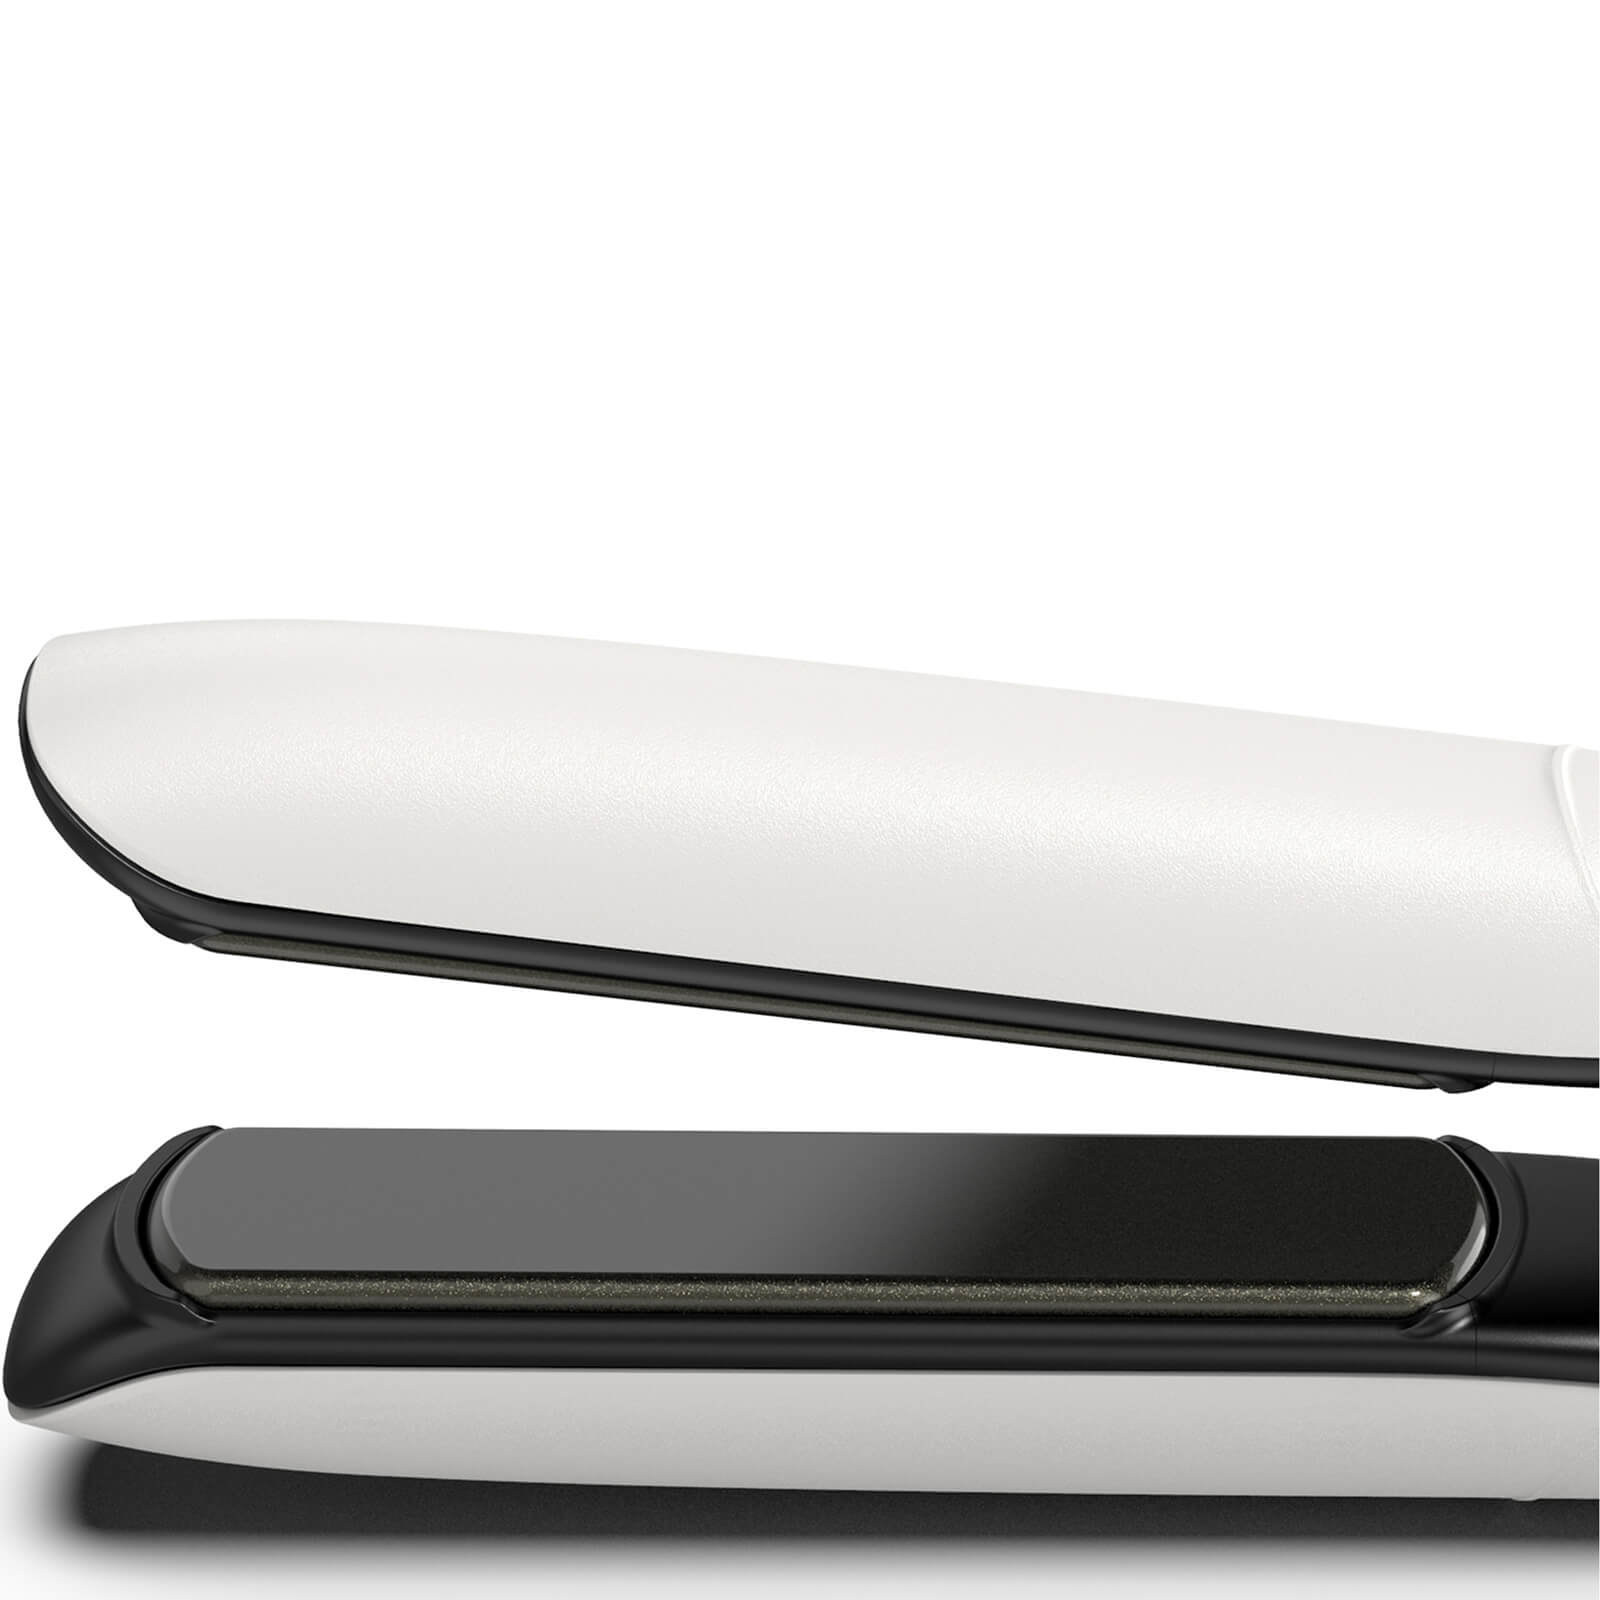 ghd Sleek flat irons for snag-free styling